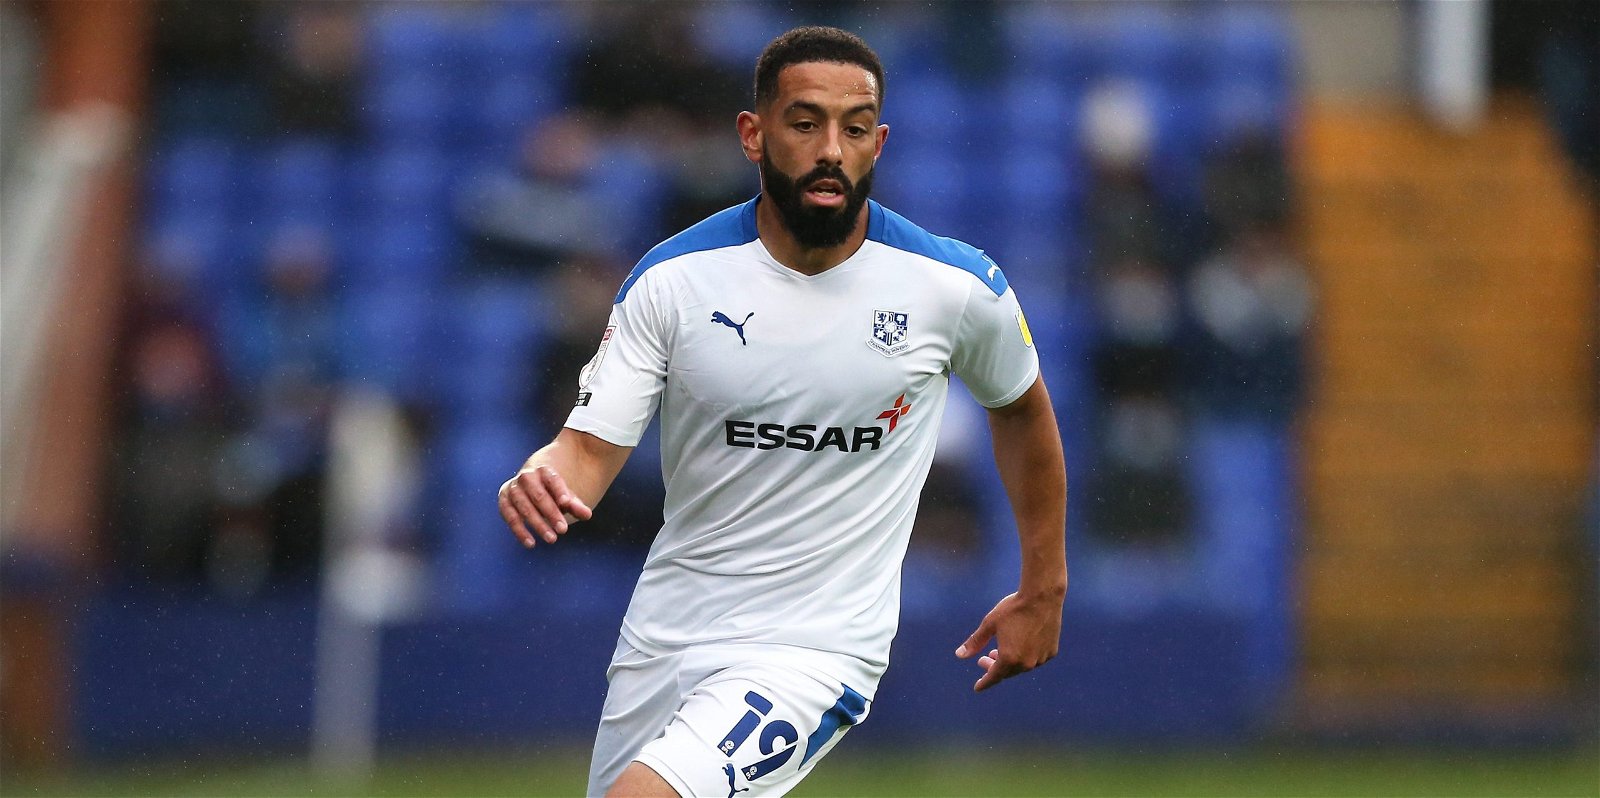 Blackpool Tranmere Rovers, Tranmere Rovers snap up Liam Feeney from Blackpool on permanent deal